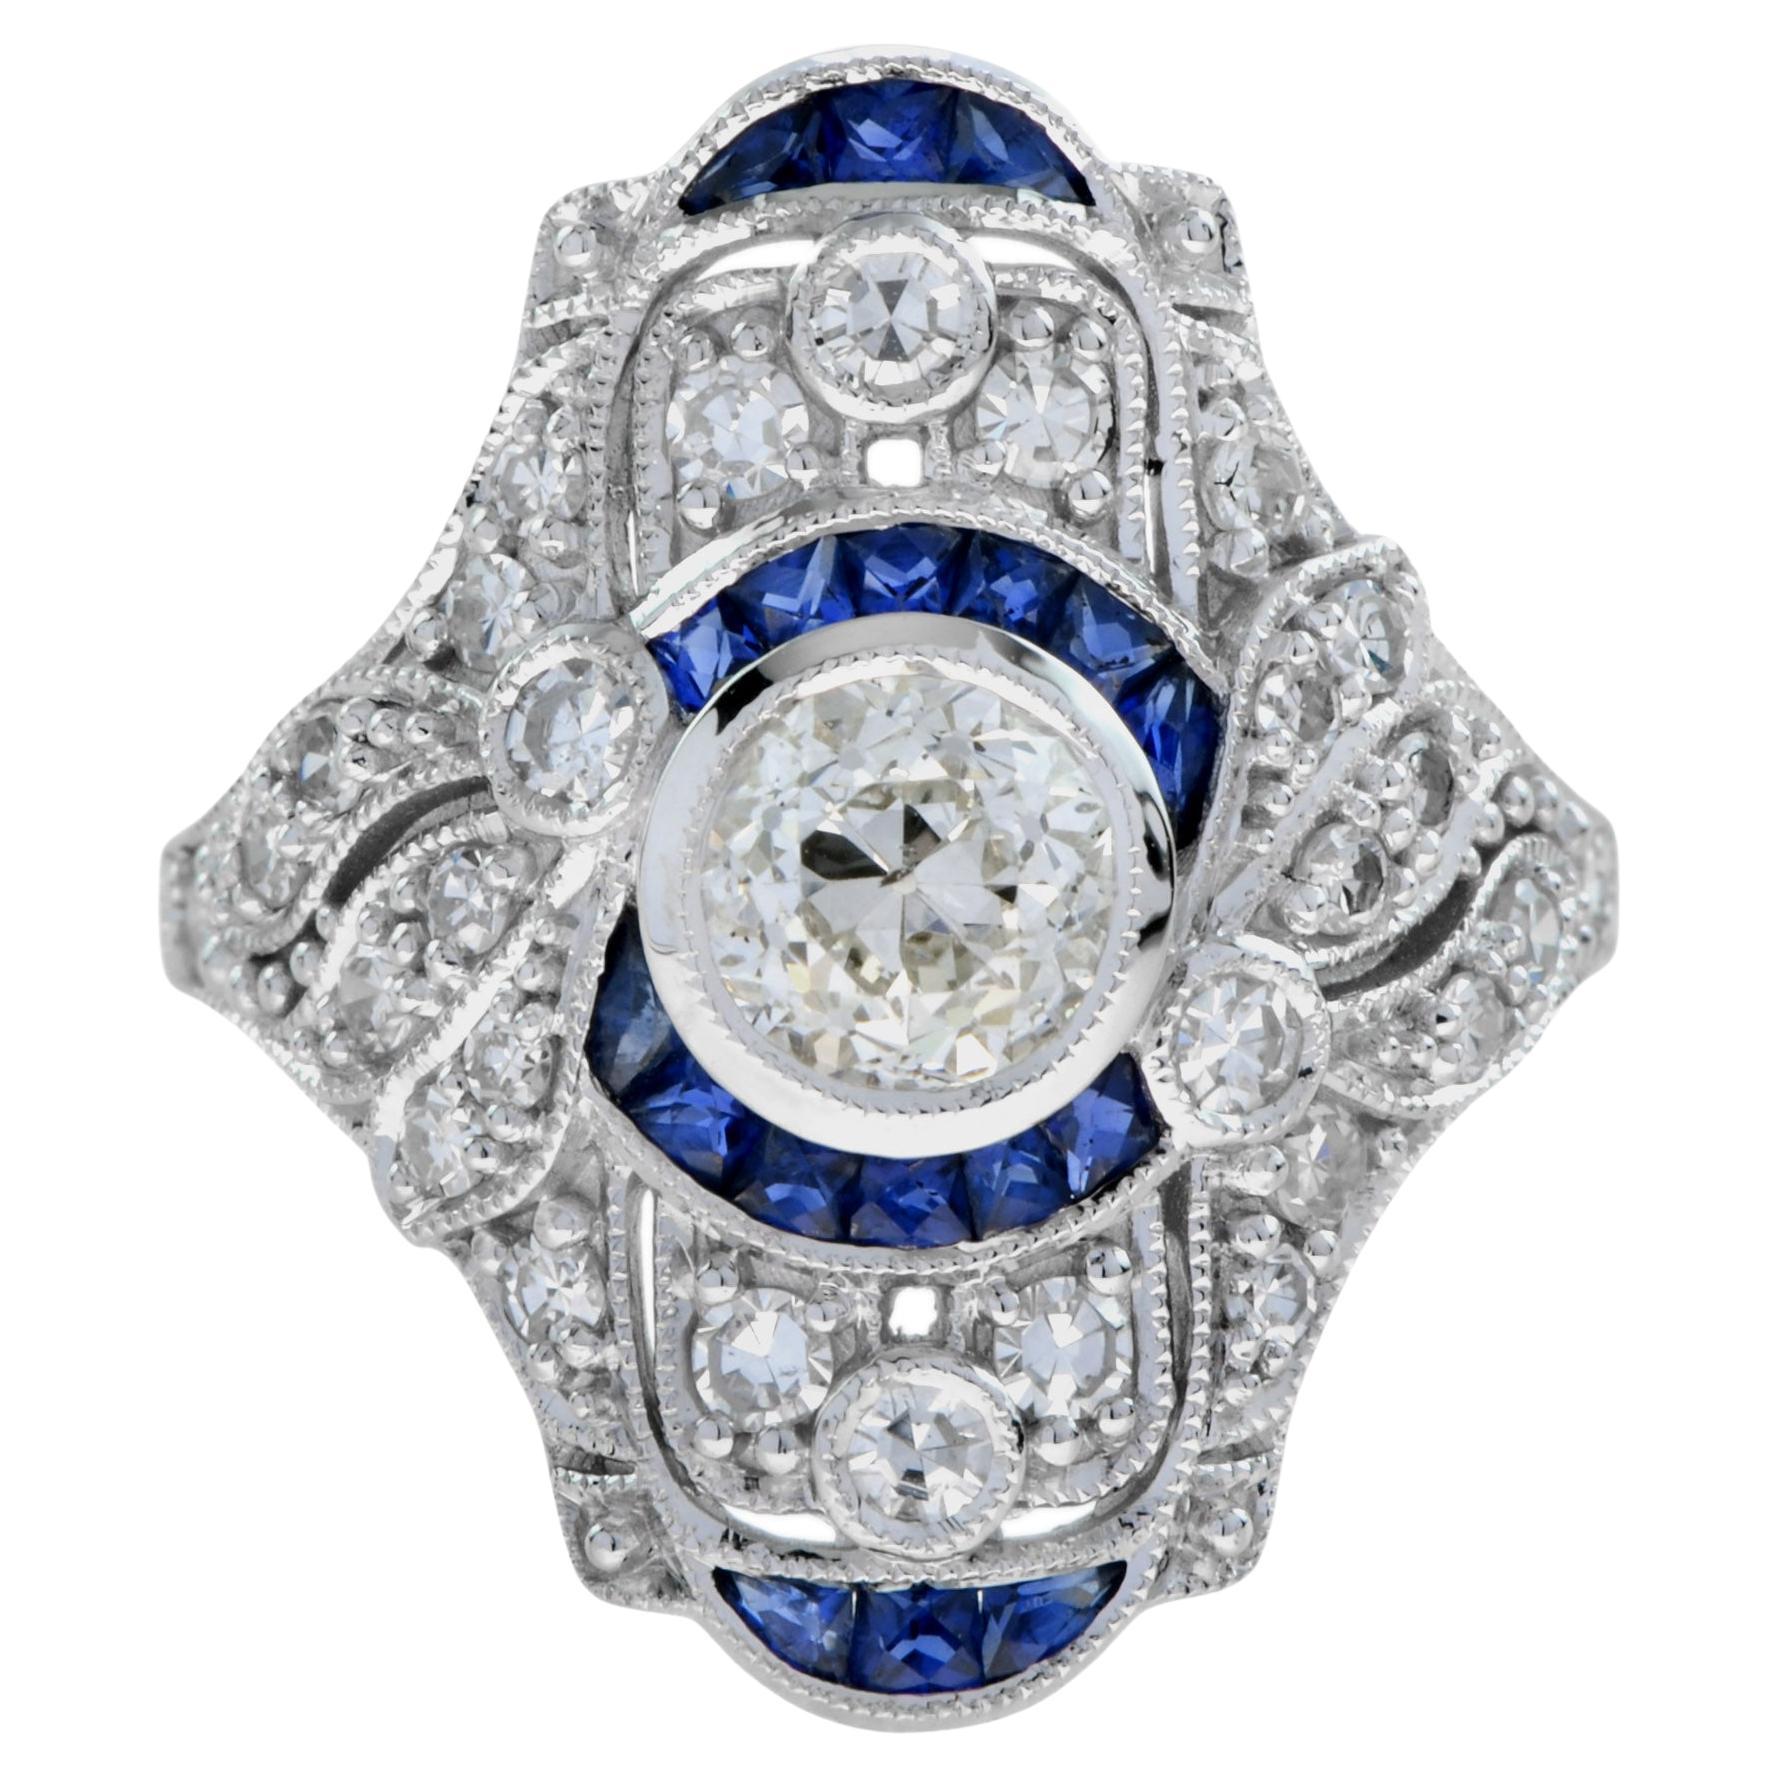 GIA Old Cut Diamond and Sapphire Art Deco Style Dinner Ring in 18k White Gold